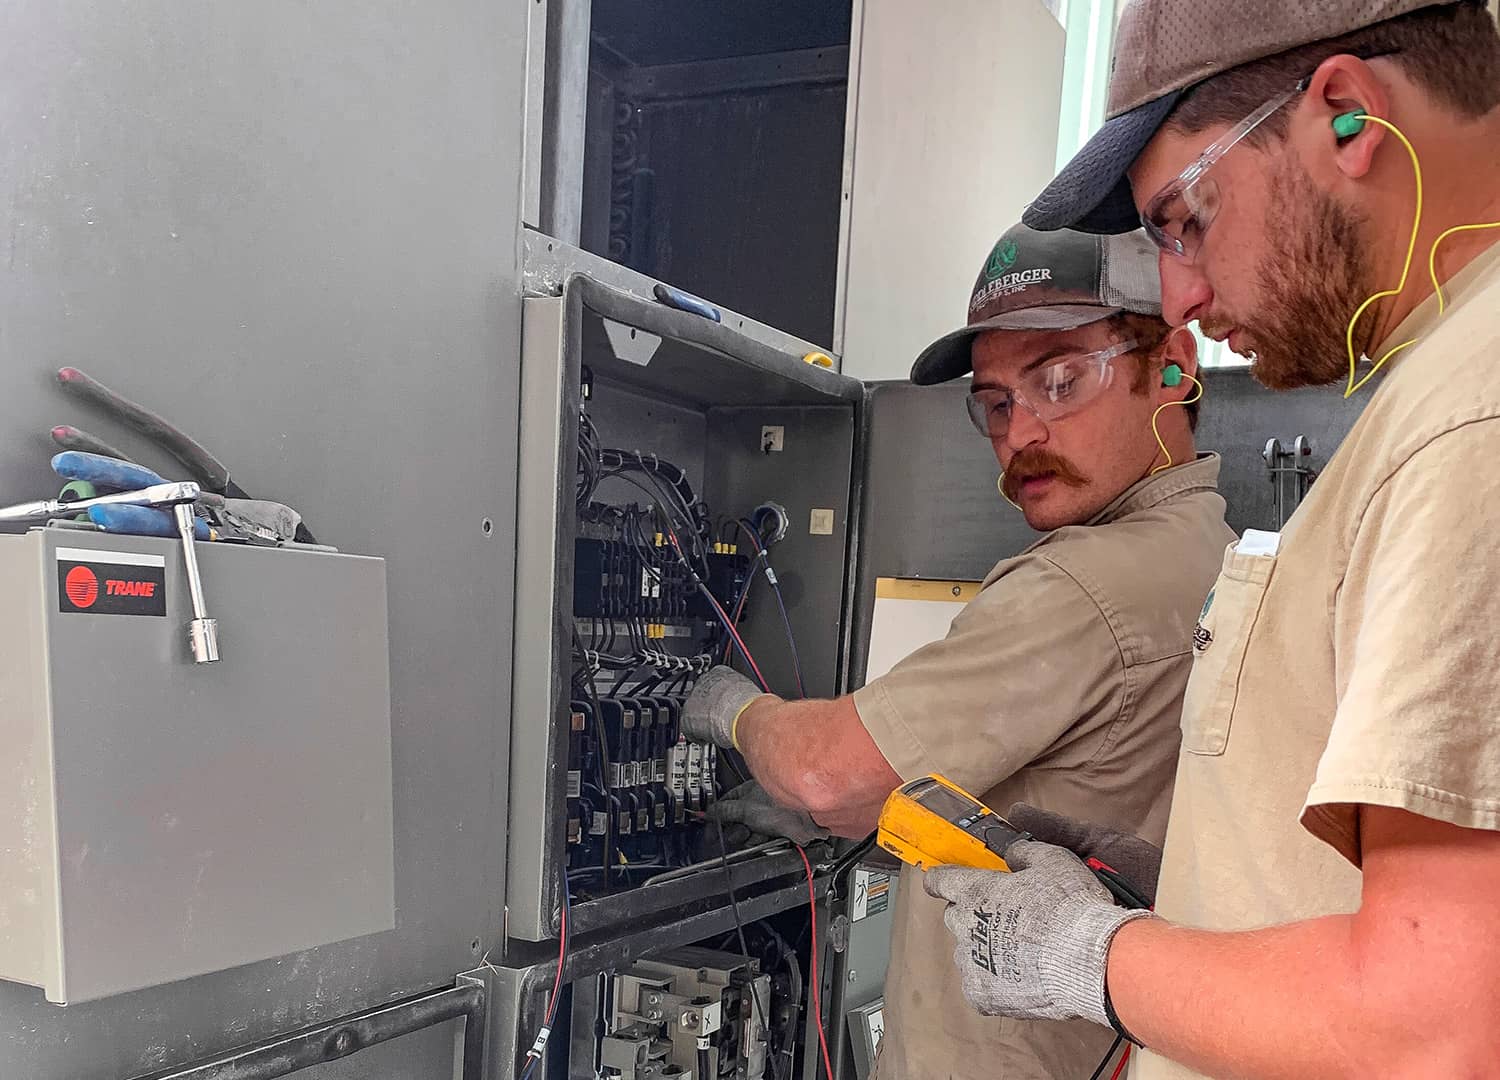 Two service technicians testing the voltage of HVAC equipment.